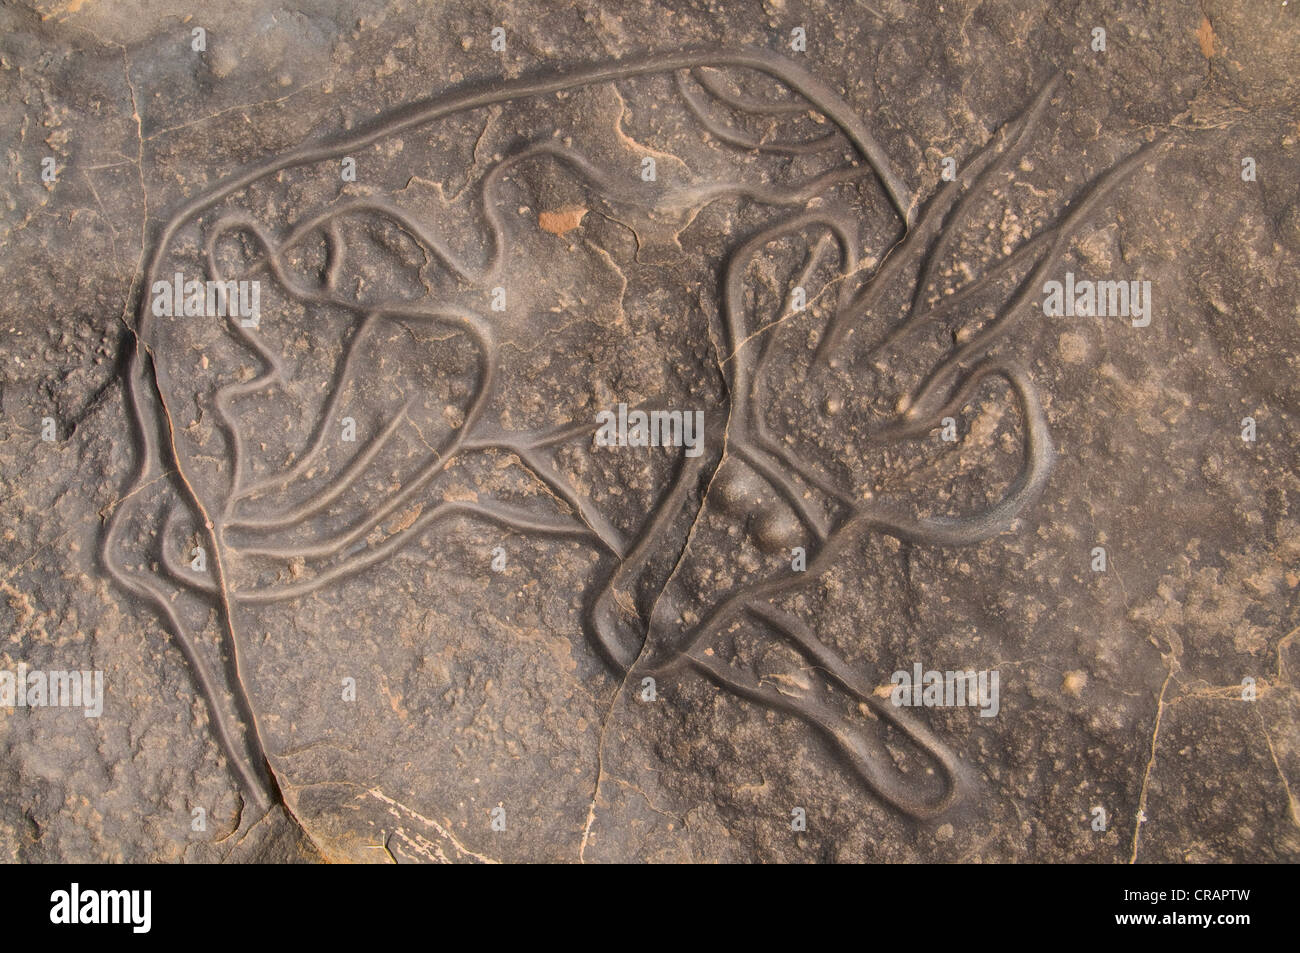 Rock engravings on the rocks of Tin Taghirt, Algeria, Africa Stock Photo